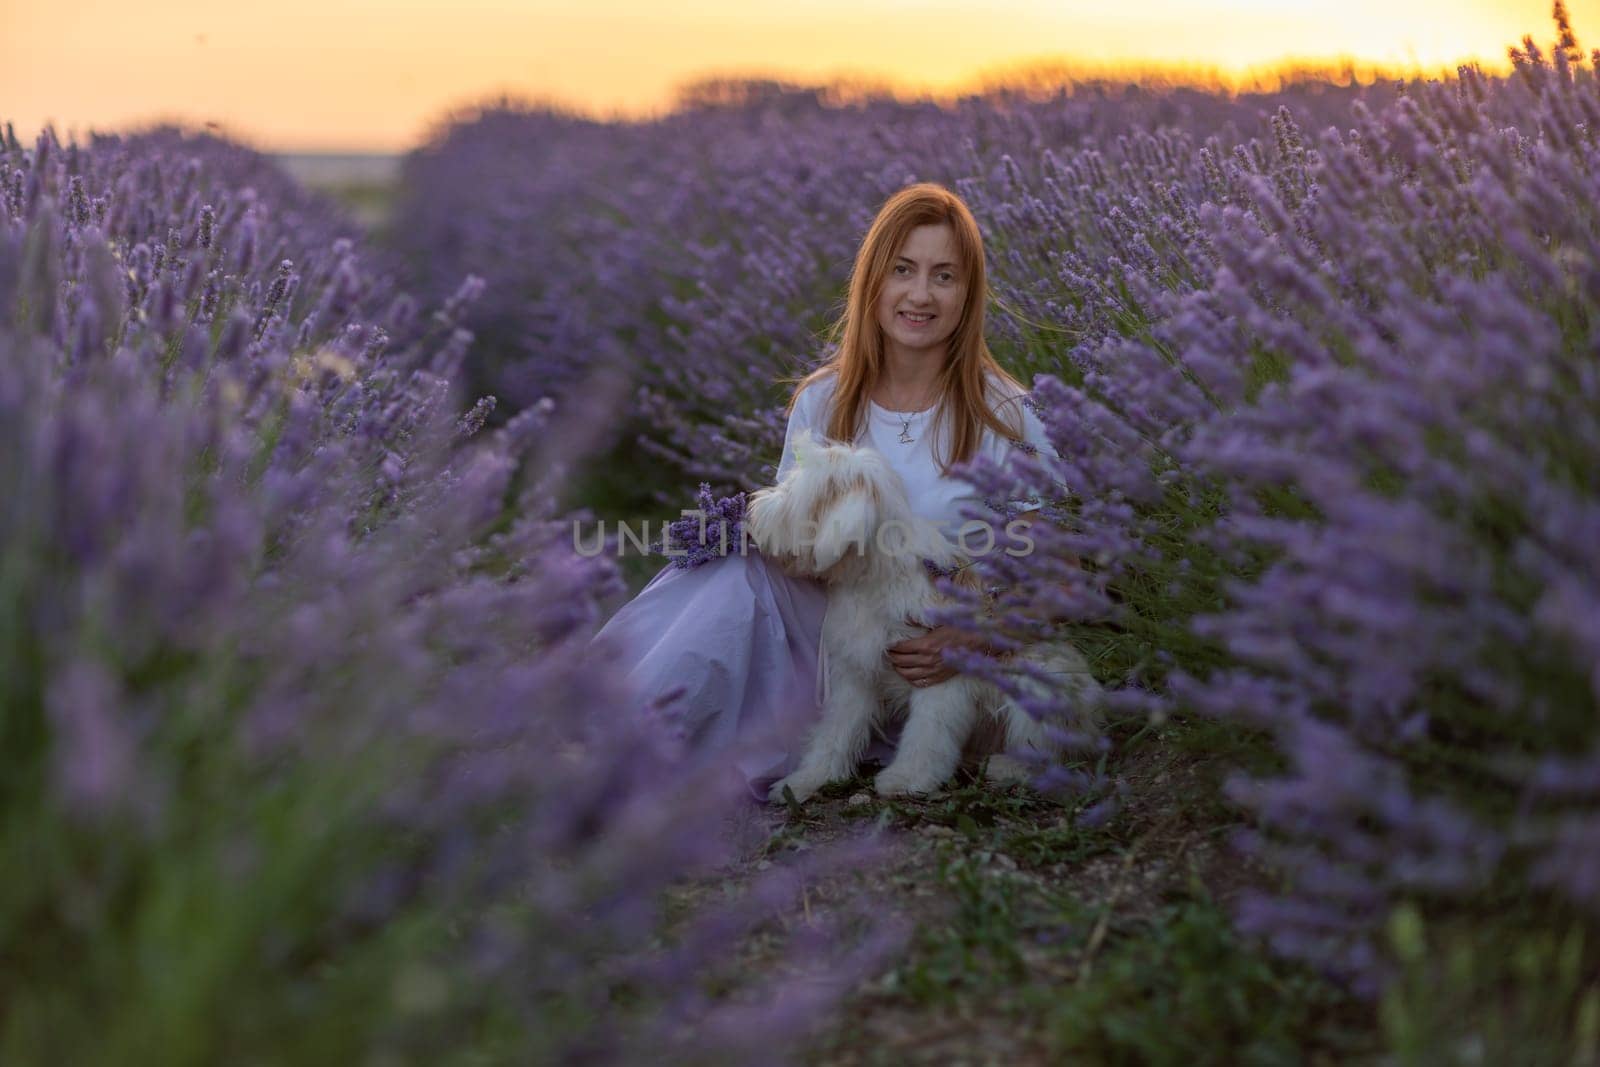 A woman sits in a field of lavender flowers with a dog by her side by Matiunina